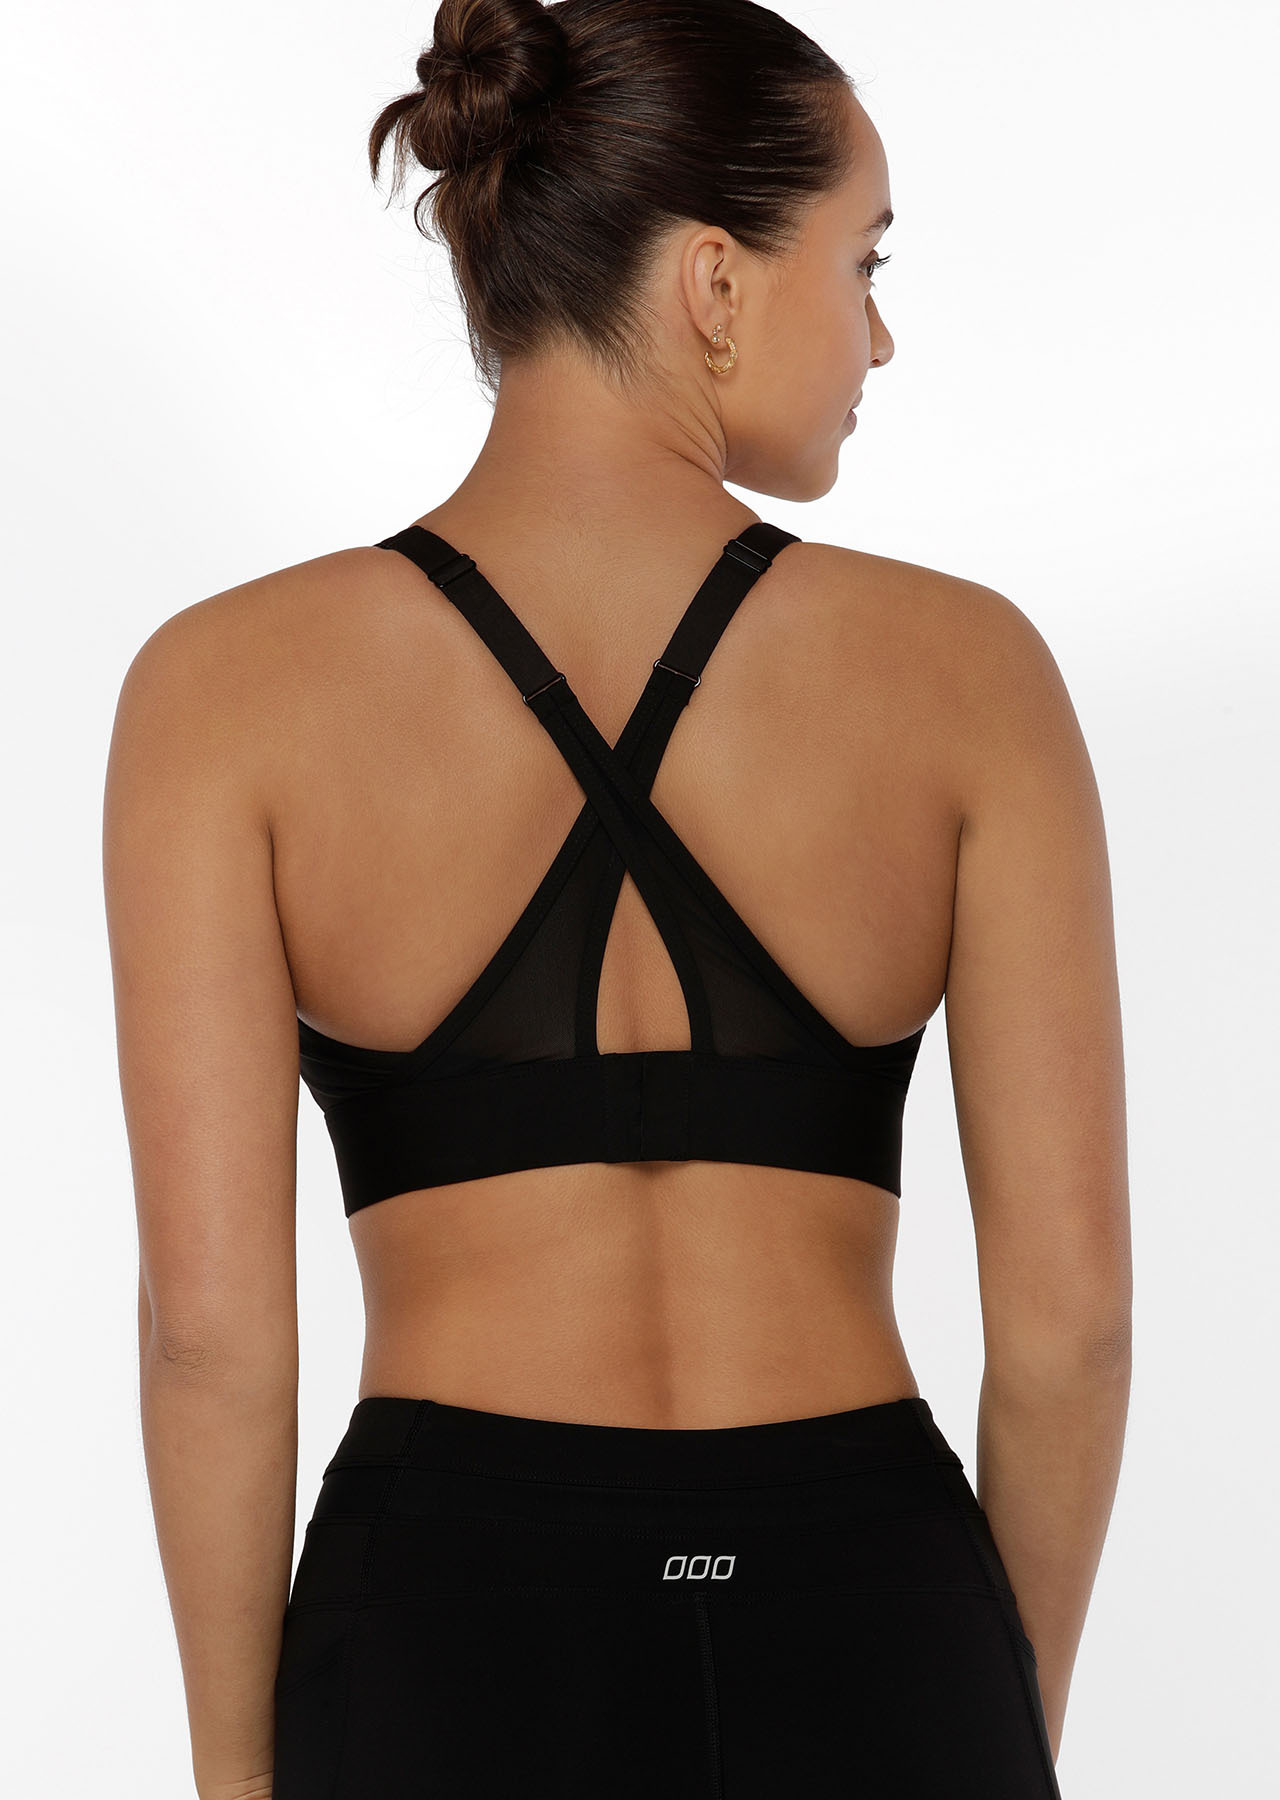 Strapless Hanging Neck Lorna Jane Sports Bra With Built In Chest